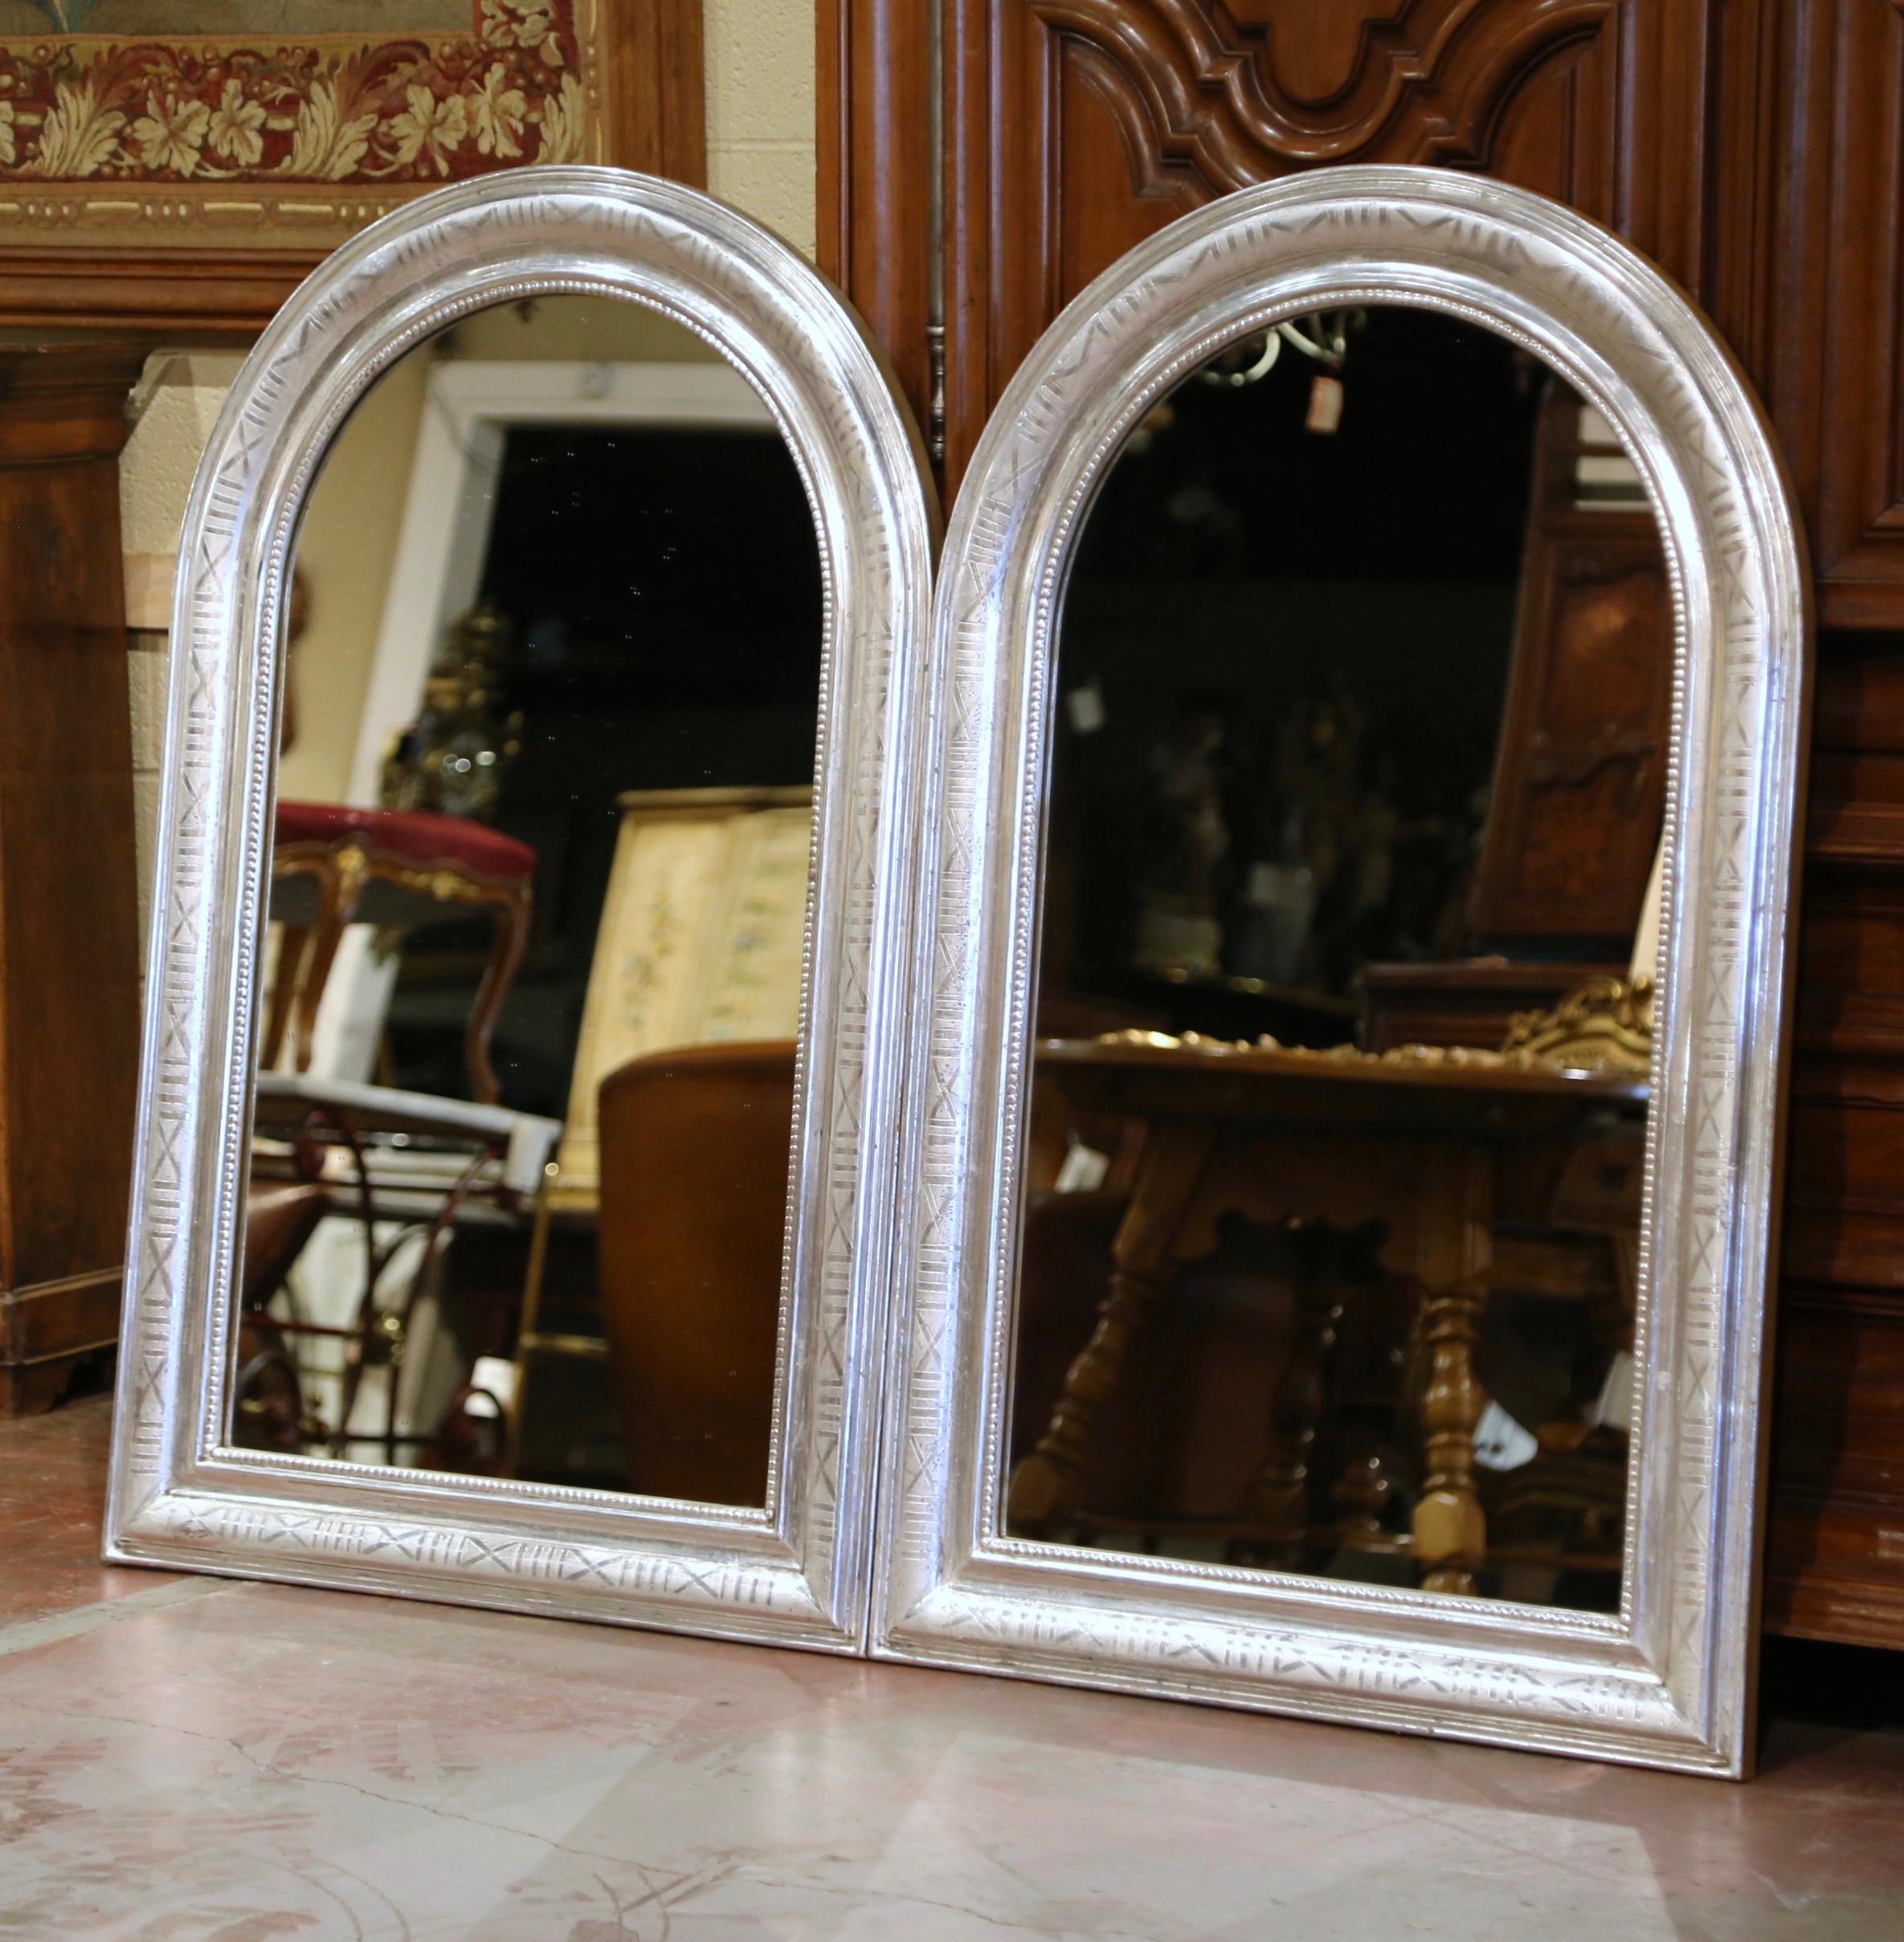 Decorate a master bathroom with this elegant pair of wall mirrors! Crafted in France, circa 1970 and four feet tall, each antique mirror has traditional, timeless lines with an elegant arched top. The frame is decorated with a luxurious silver leaf